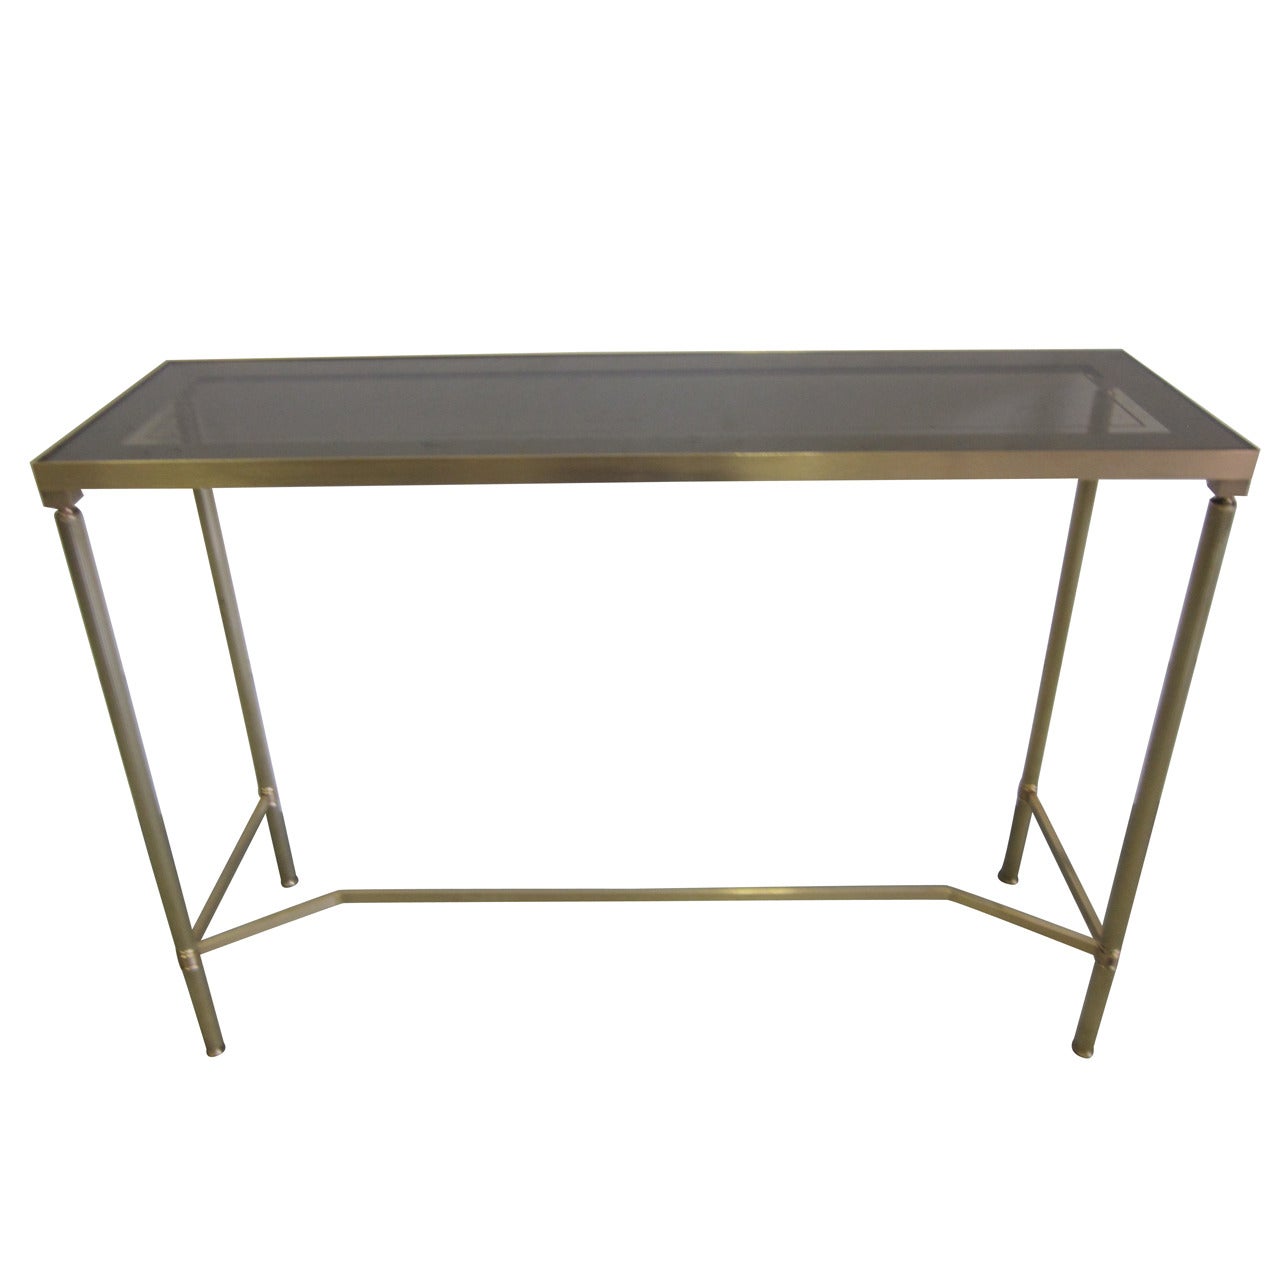 French Midcentury Brass and Reverse Painted Glass Console / Sofa Table, Baguès